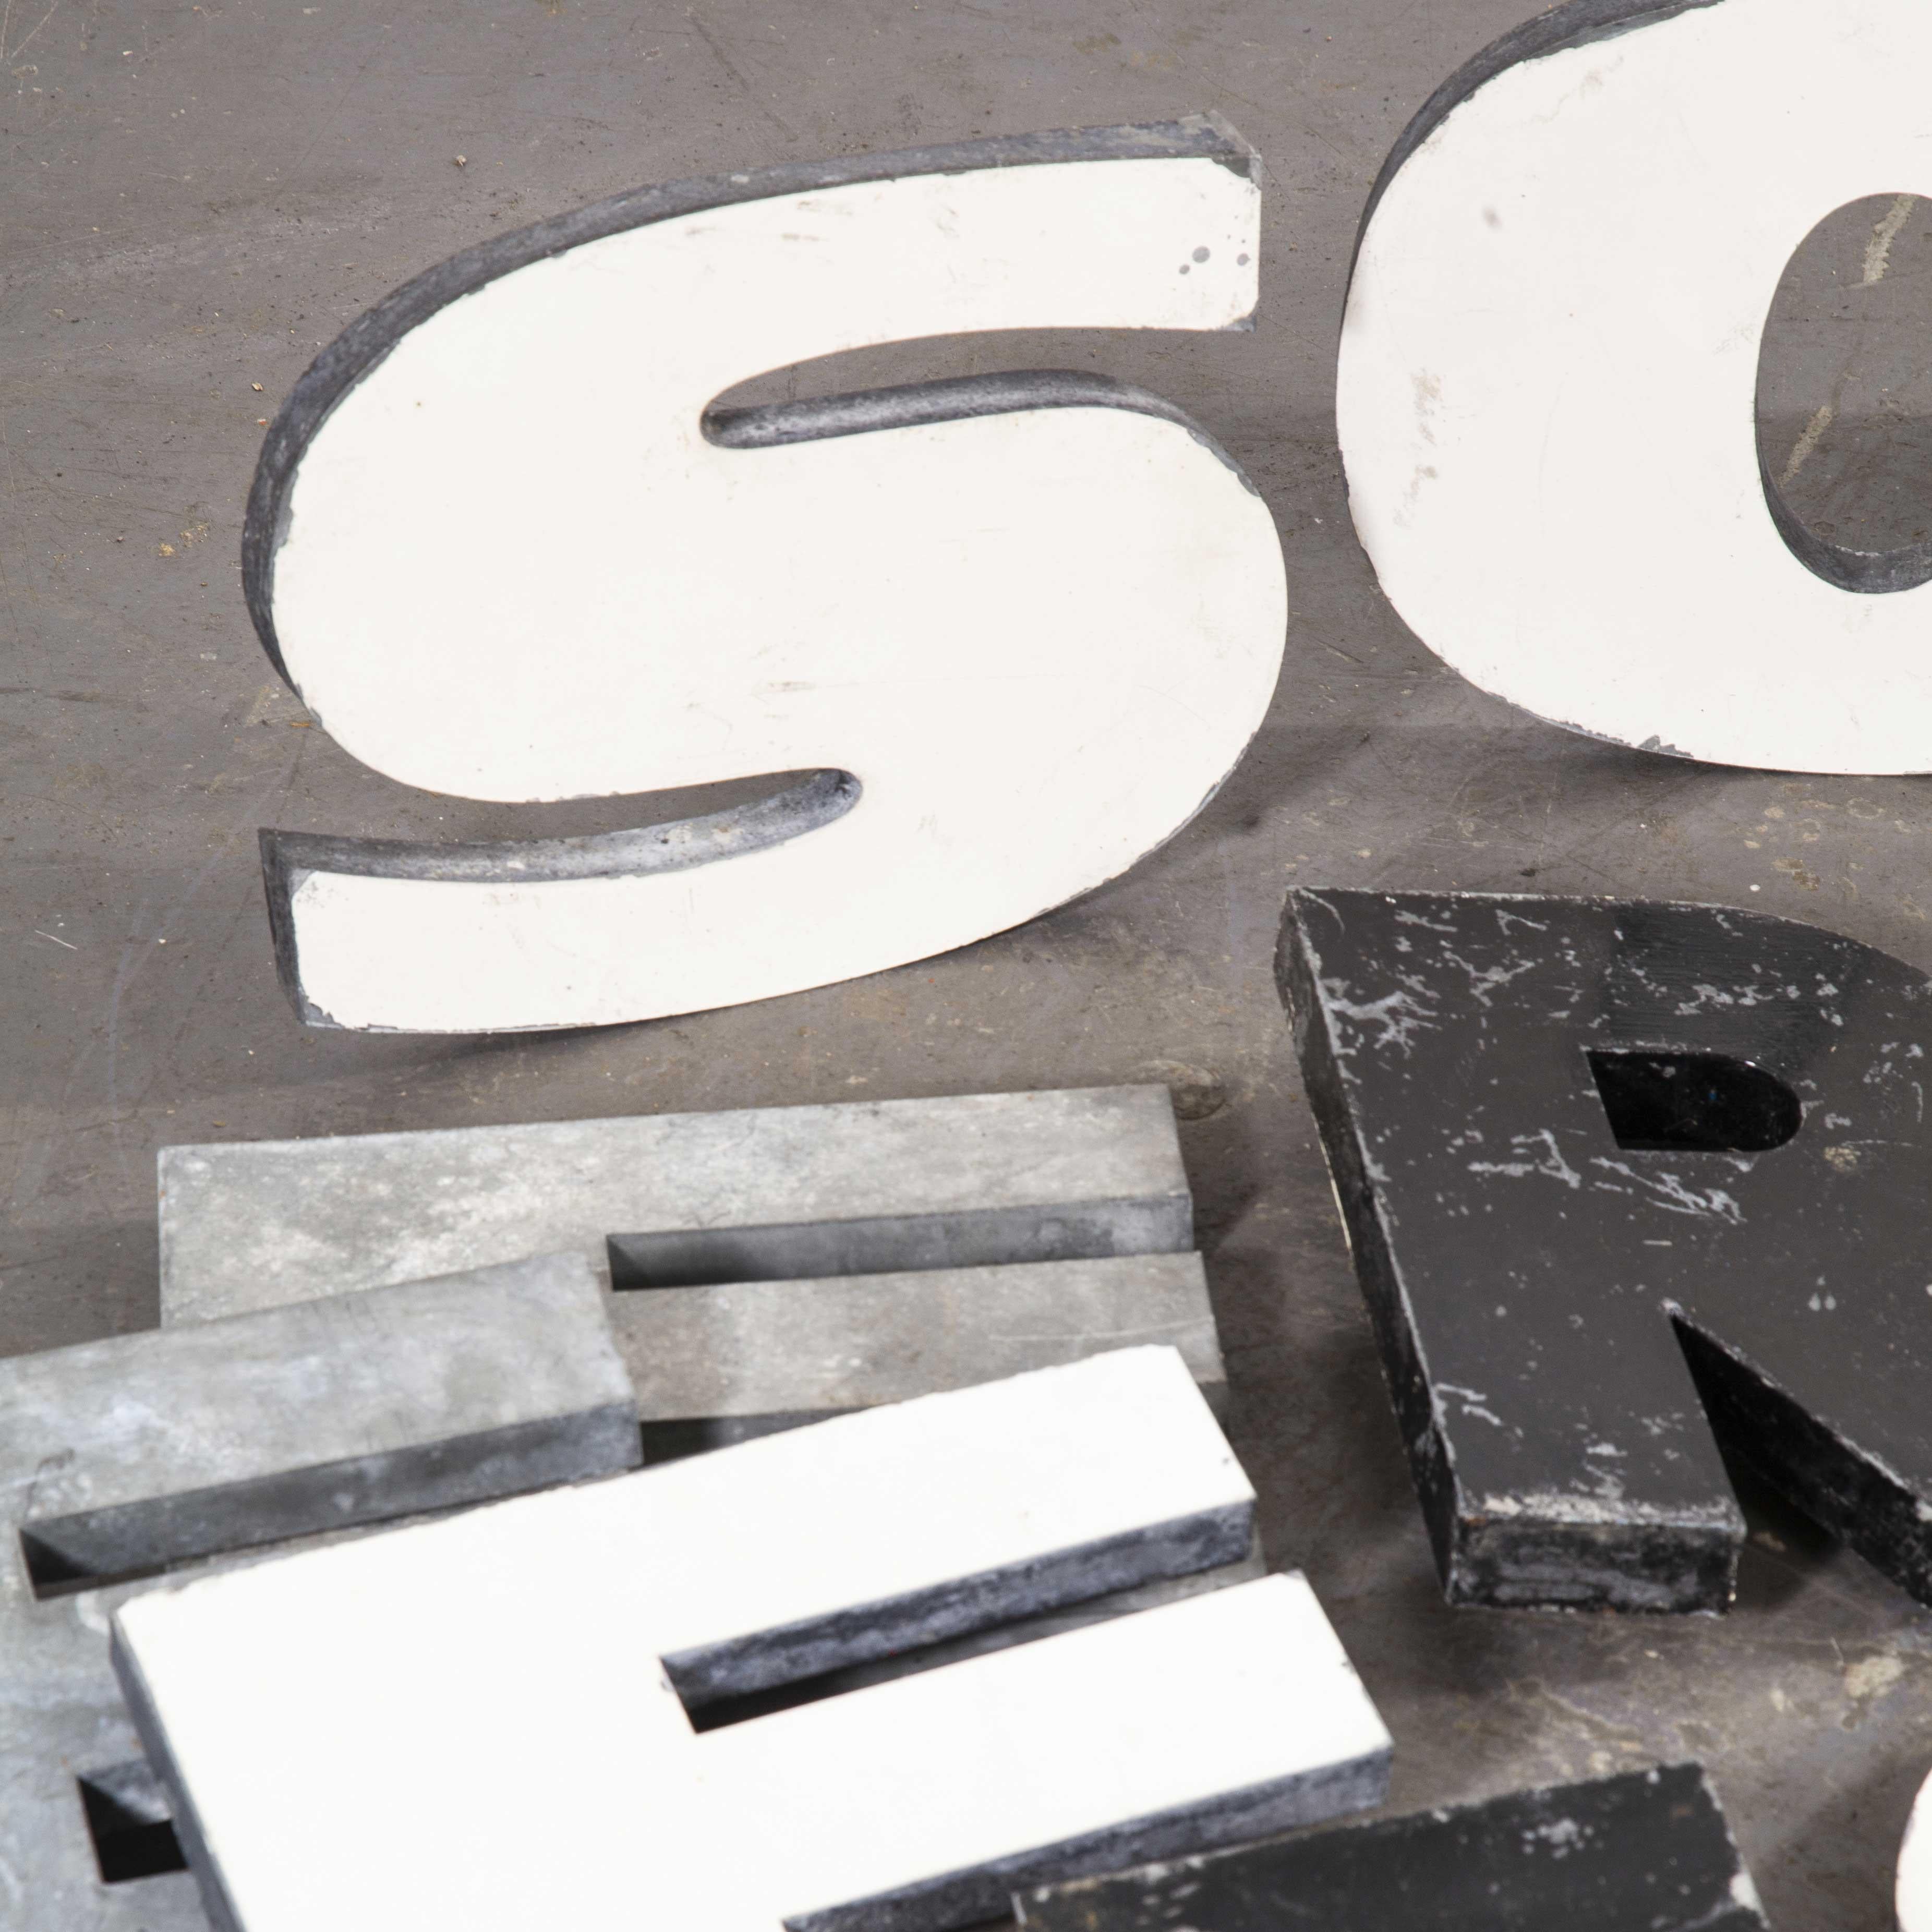 1950’s French Zinc Letters – Letter Zinc S
1950’s French zinc letters – Letter Zinc S. We have 19 of these well worn and very beautiful zinc letters which look beautiful as decorative pieces in their own right or are frequently bought as customer